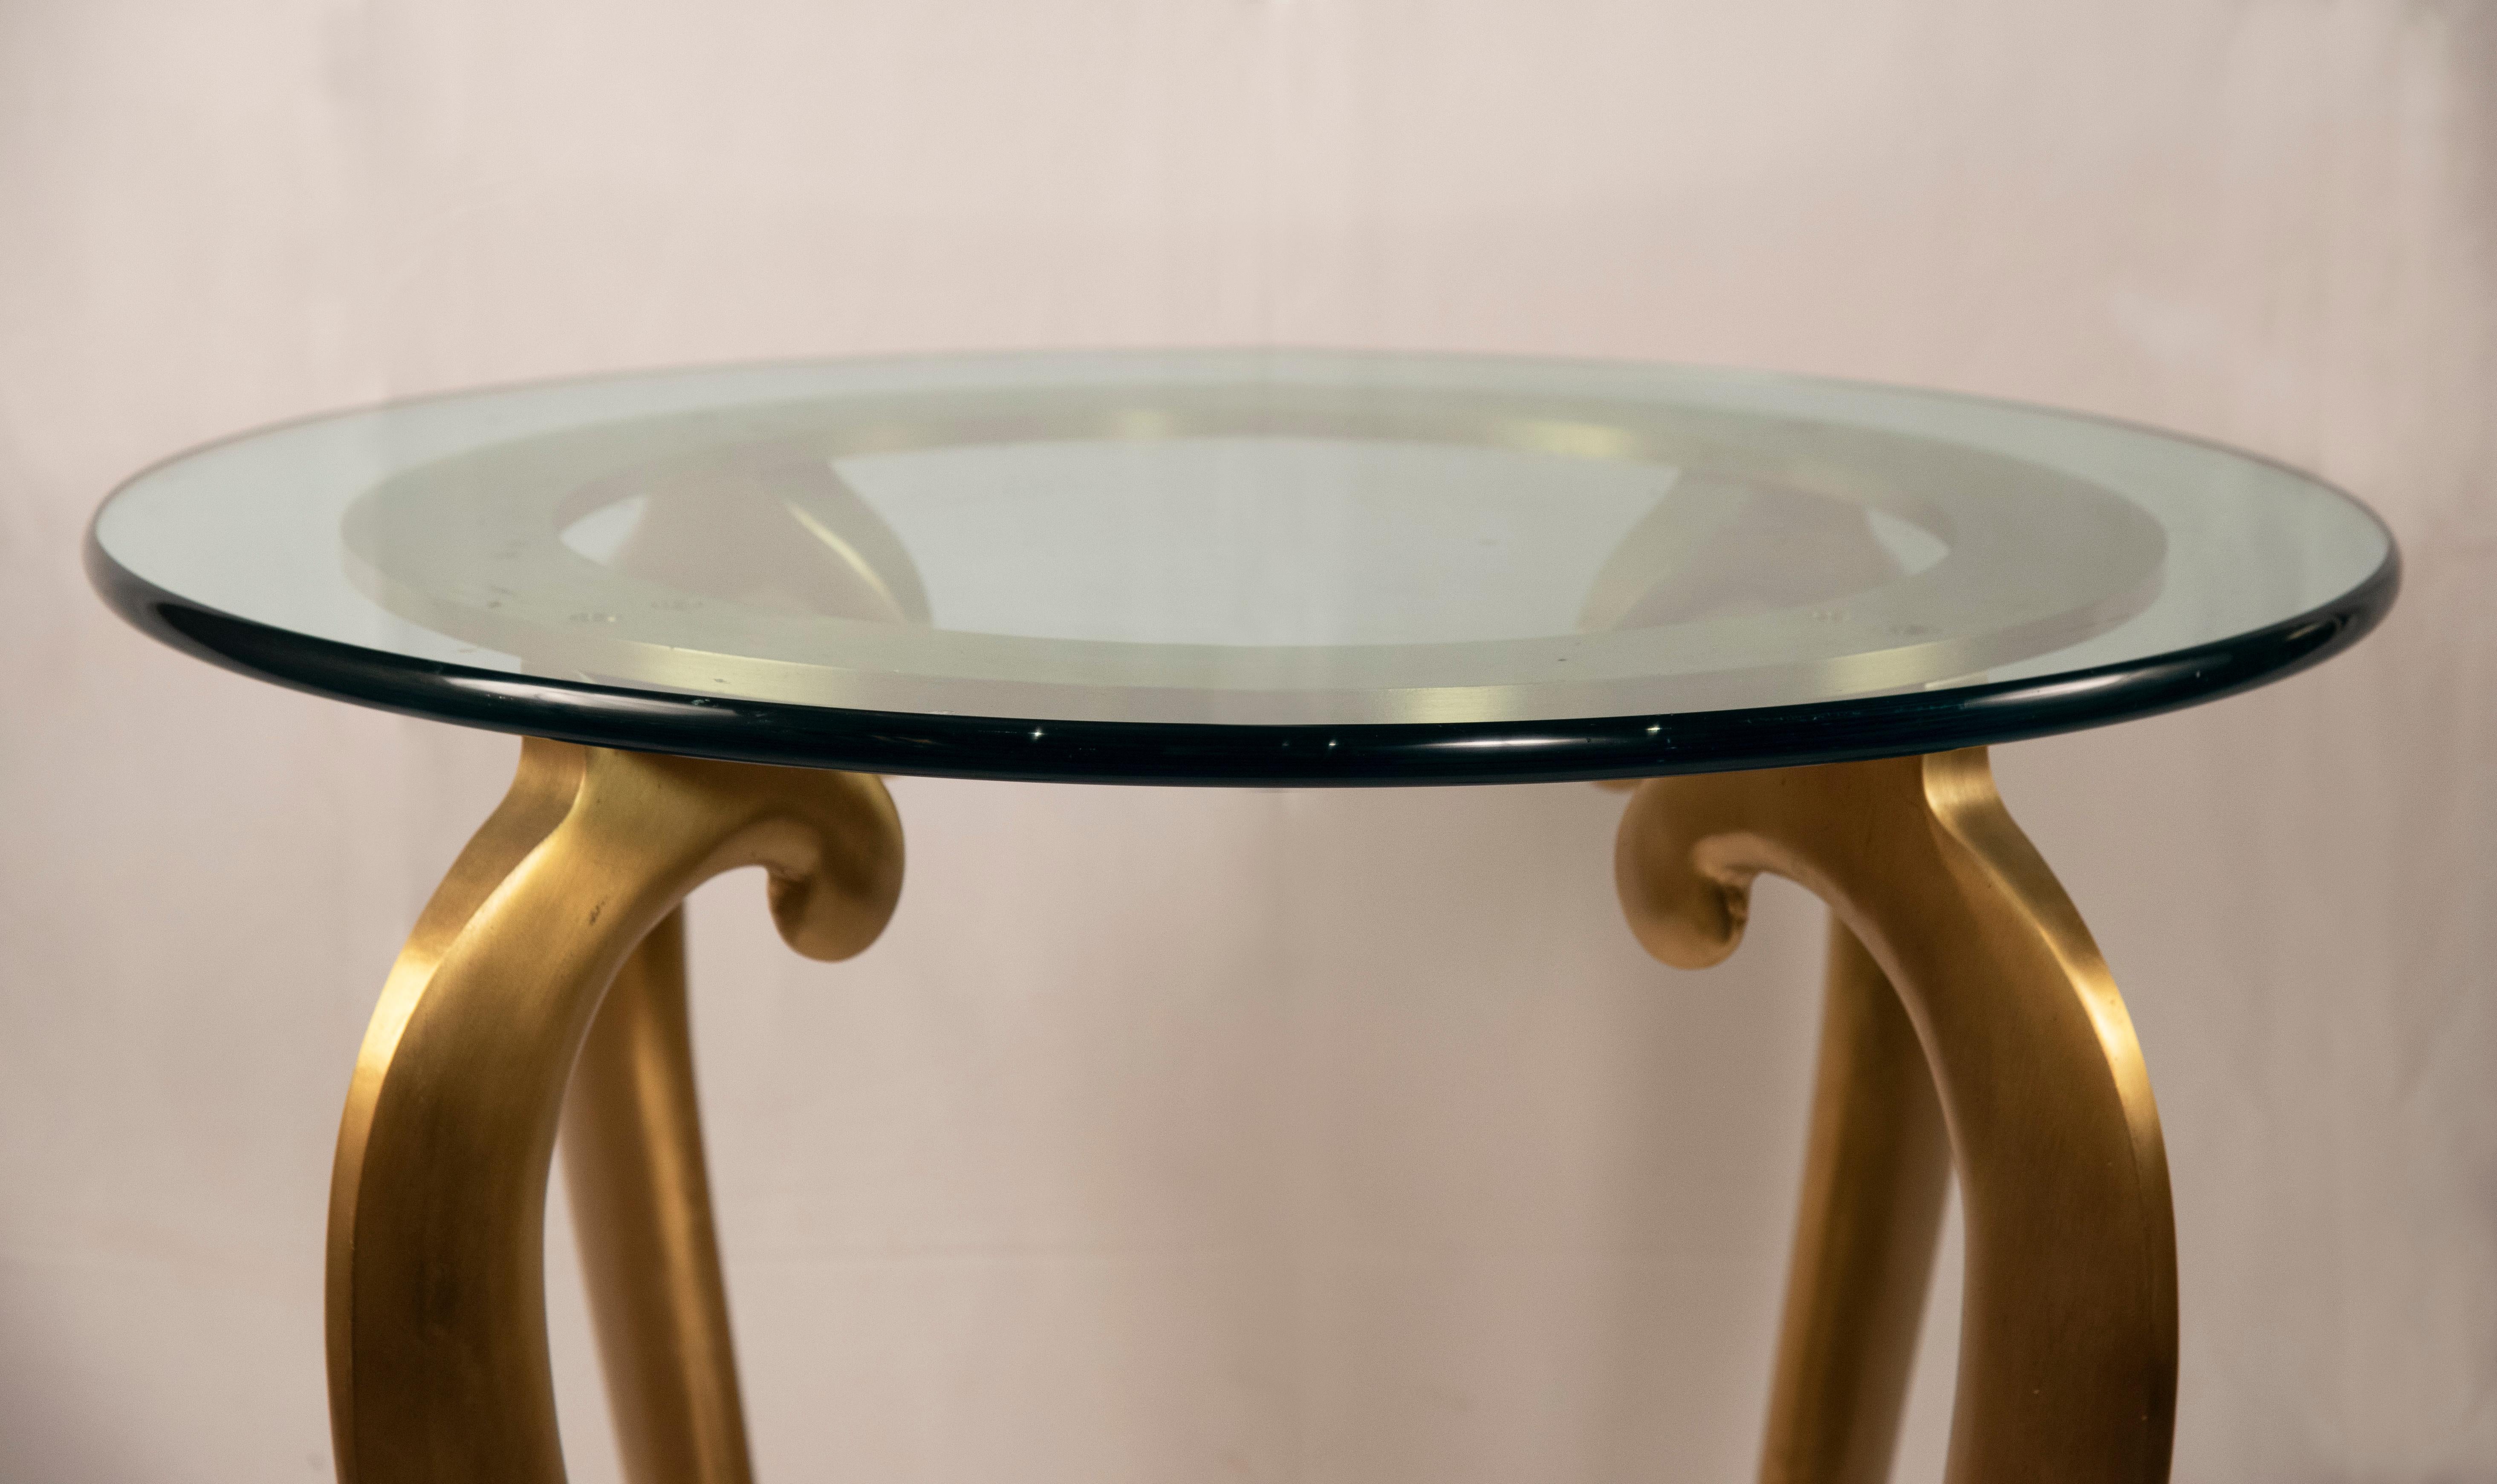 Curved golden legs with a separate glass top.